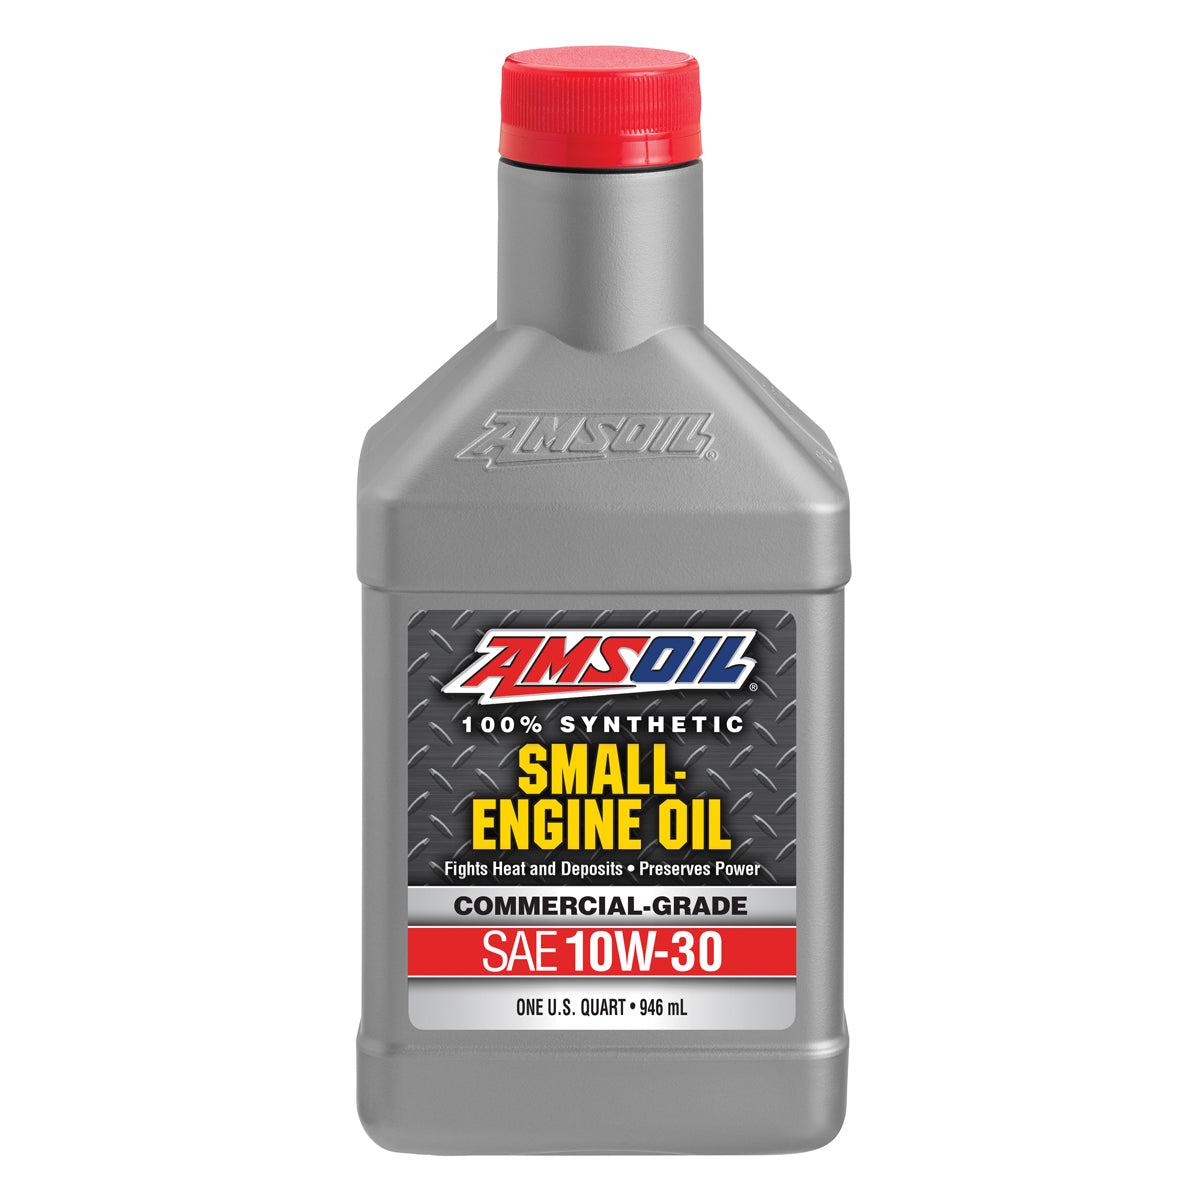 XAO ASEQT | 10W30 SYNTHETIC SMALL ENGINE OIL COMMERCIAL GRADE | 1 QUART